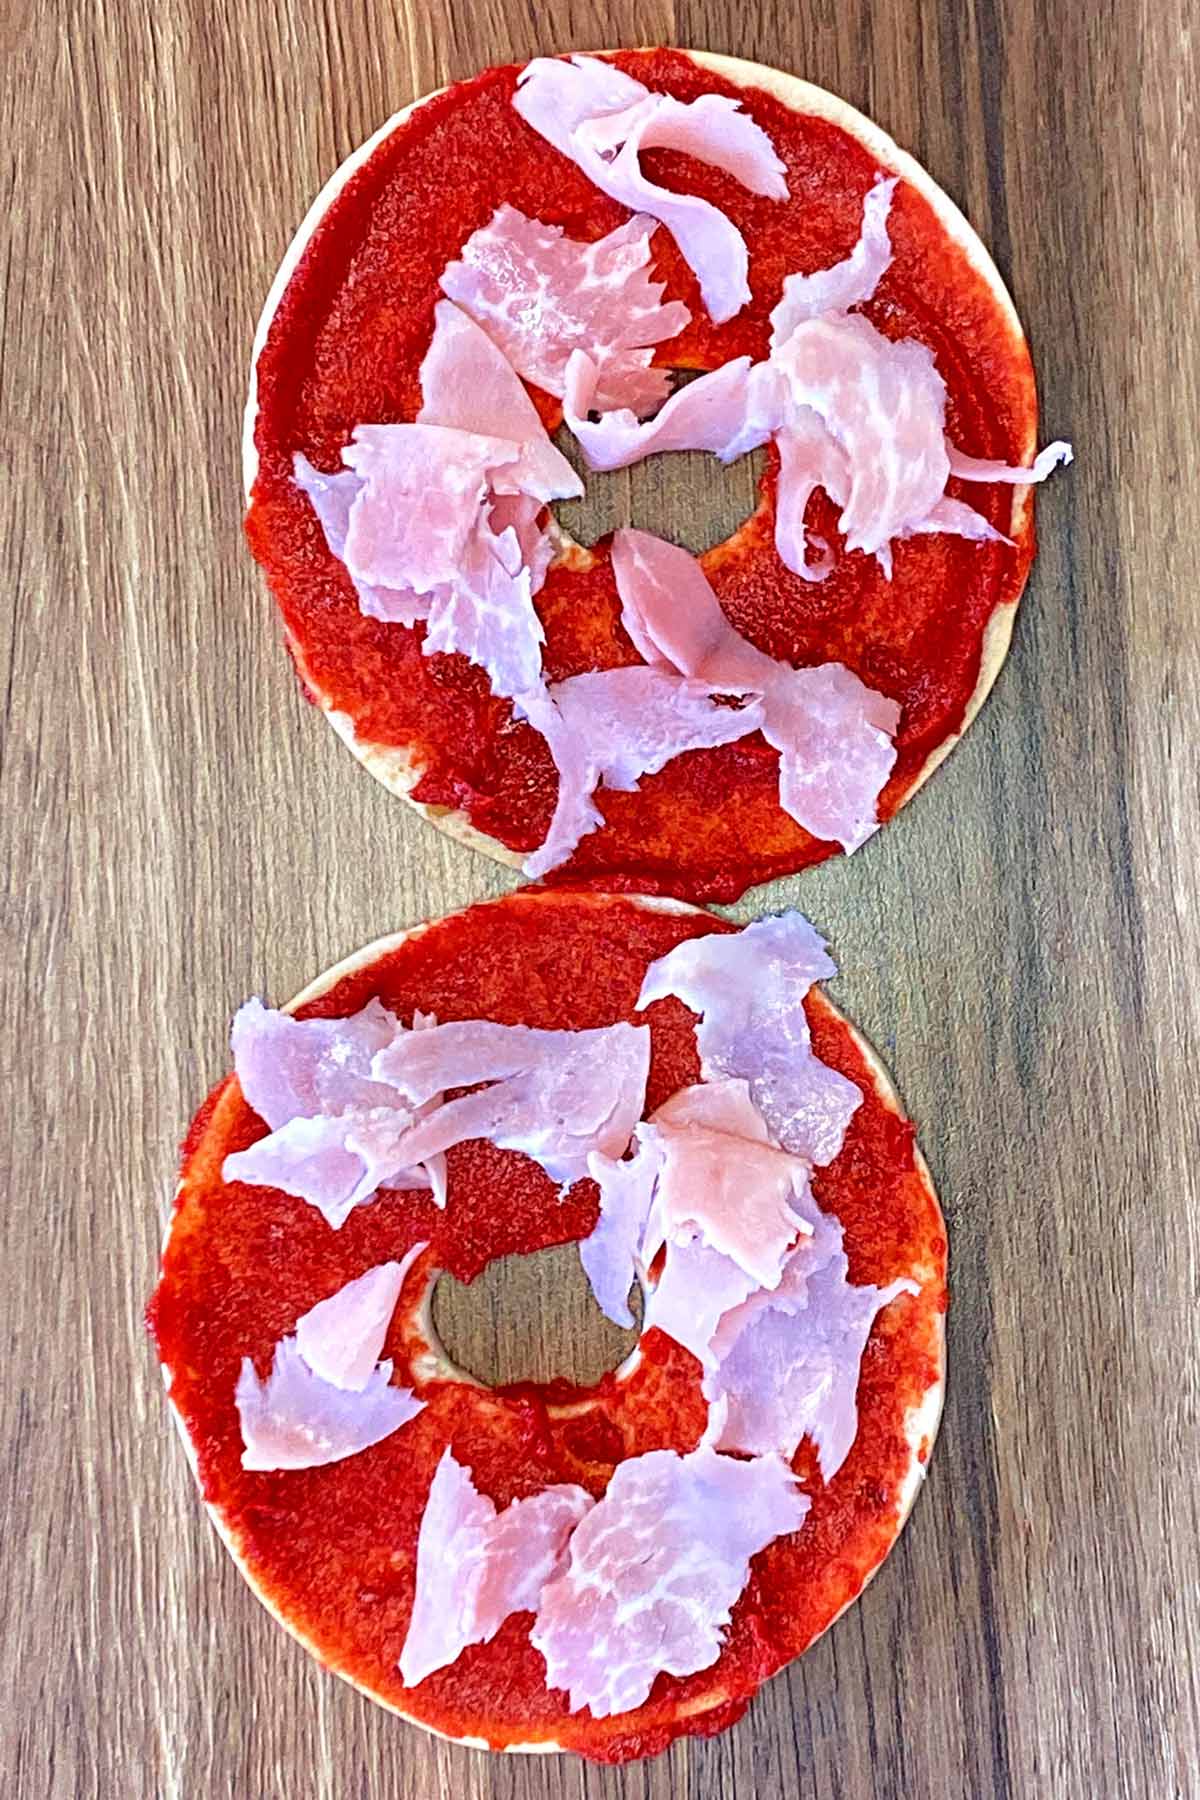 Small pieces of ham added to the bagel.